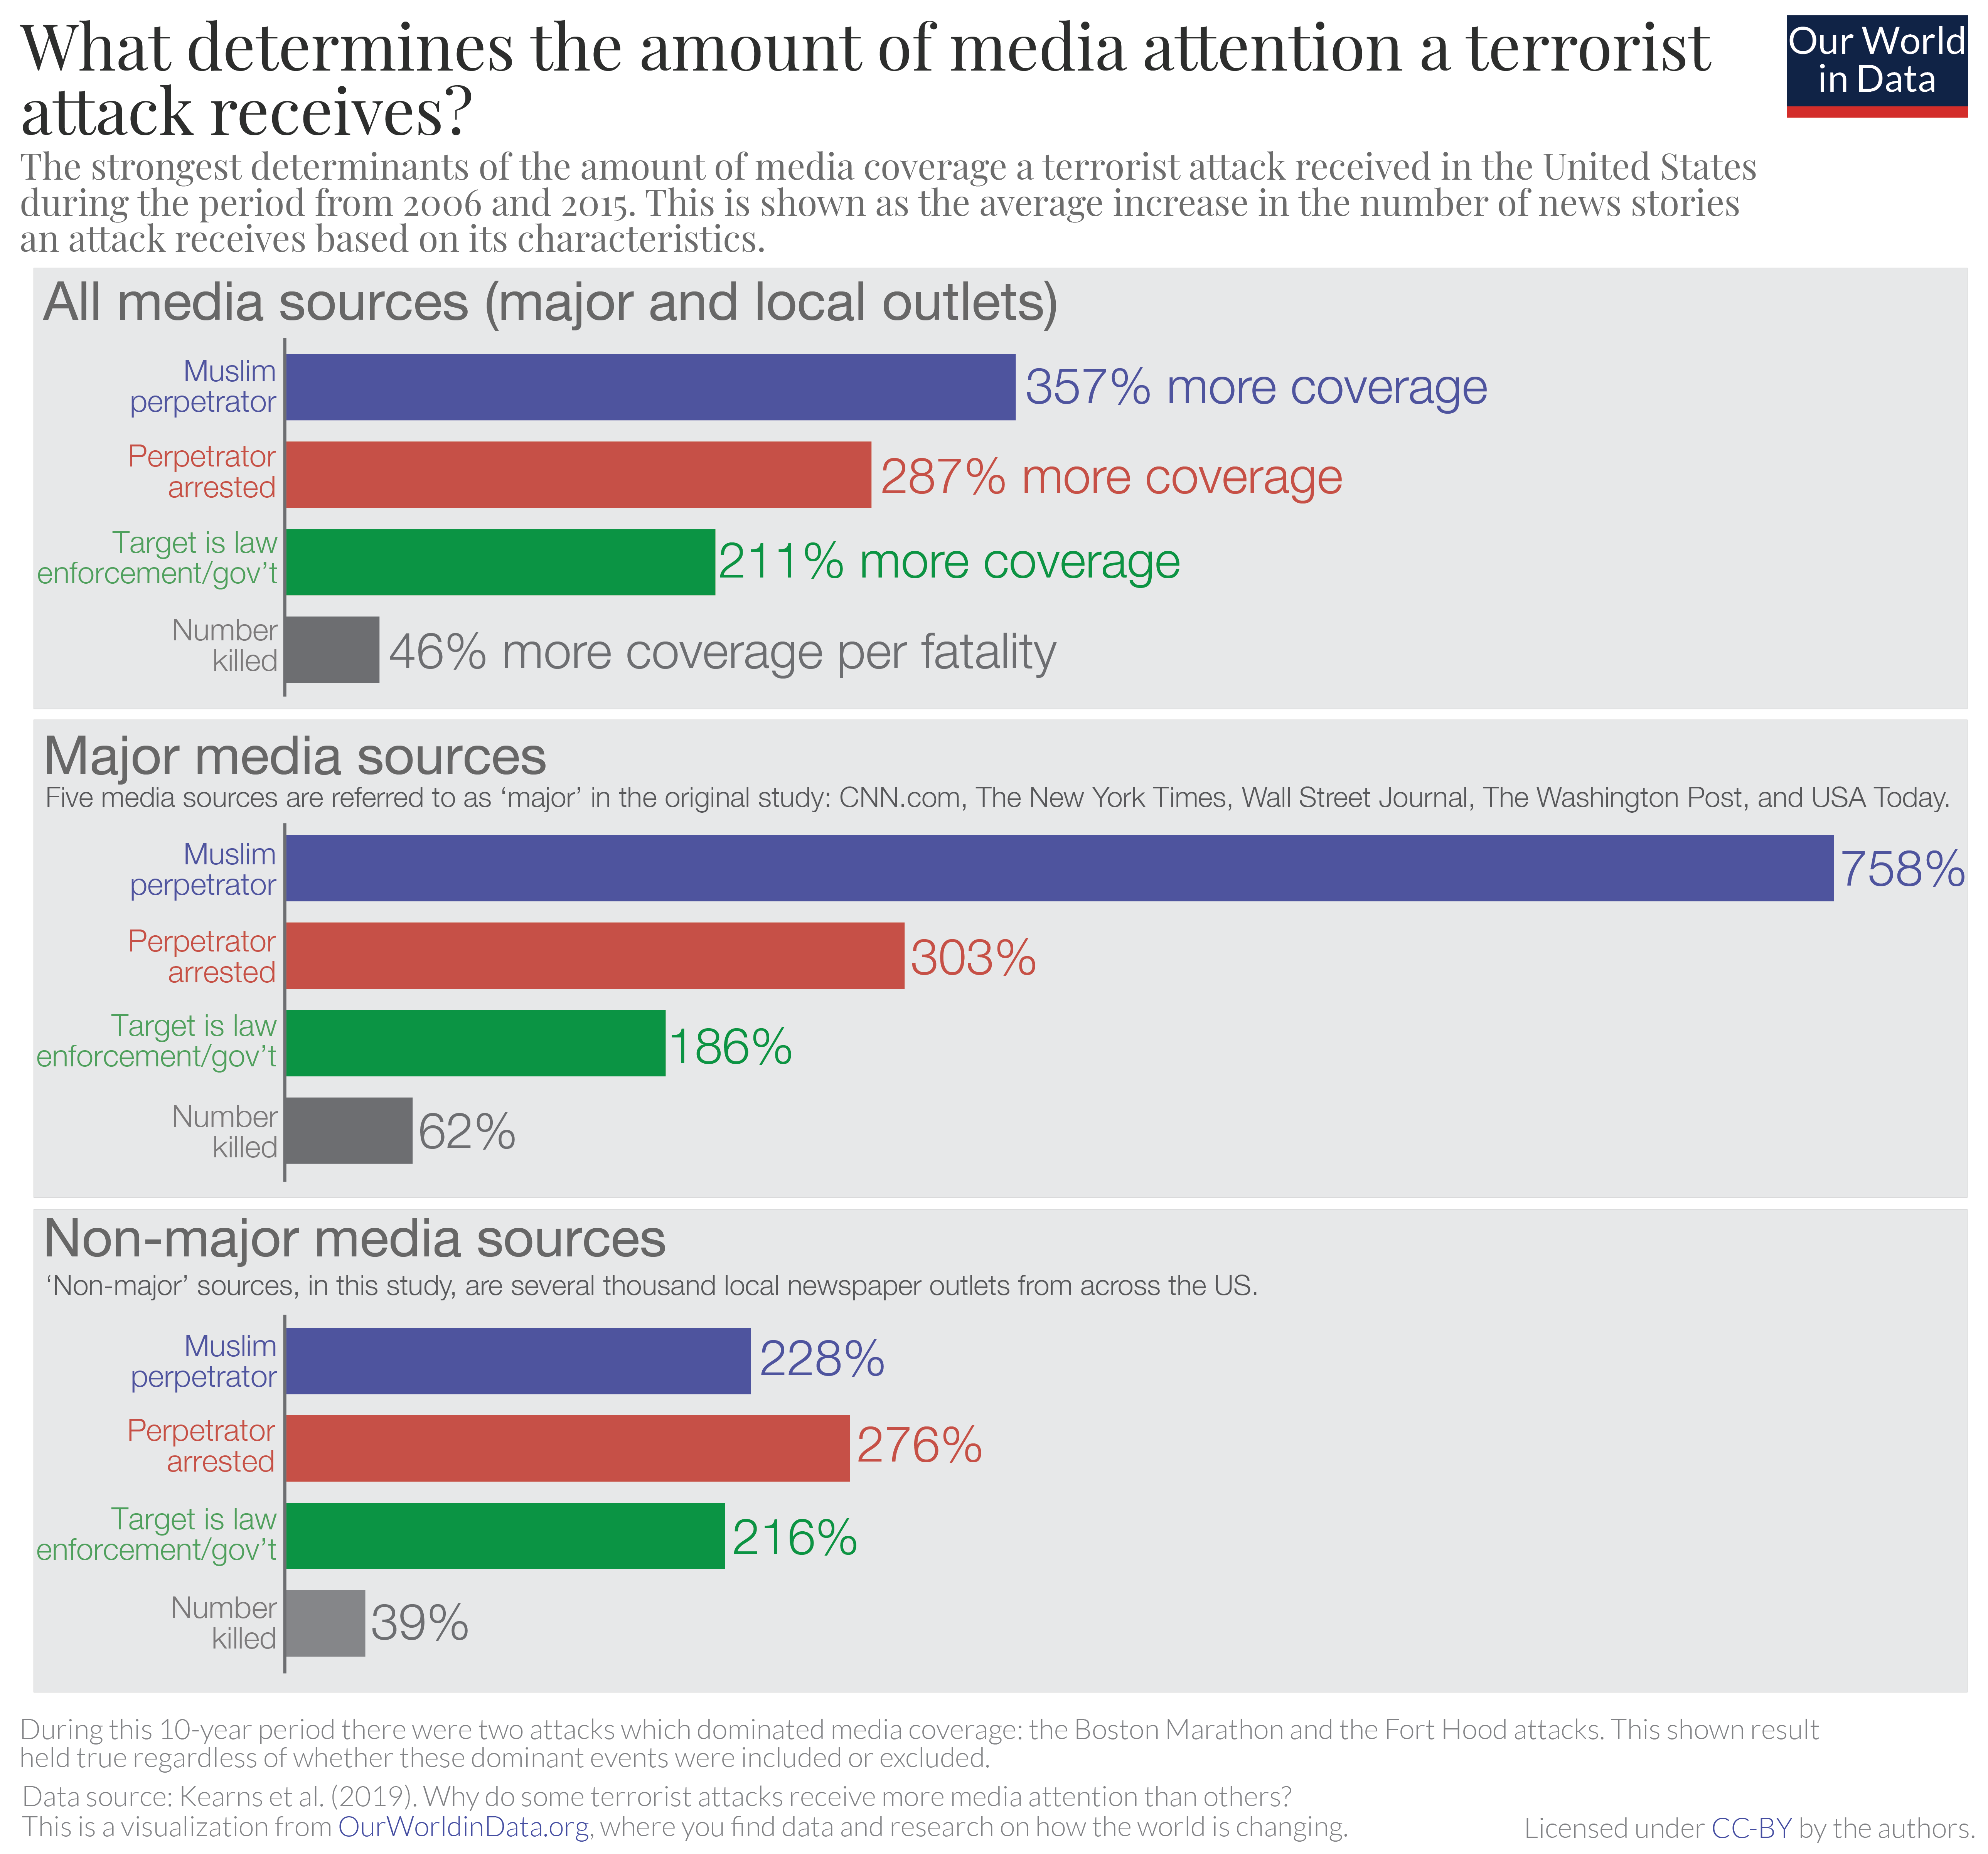 Why do some terrorist attacks receive more media attention than others